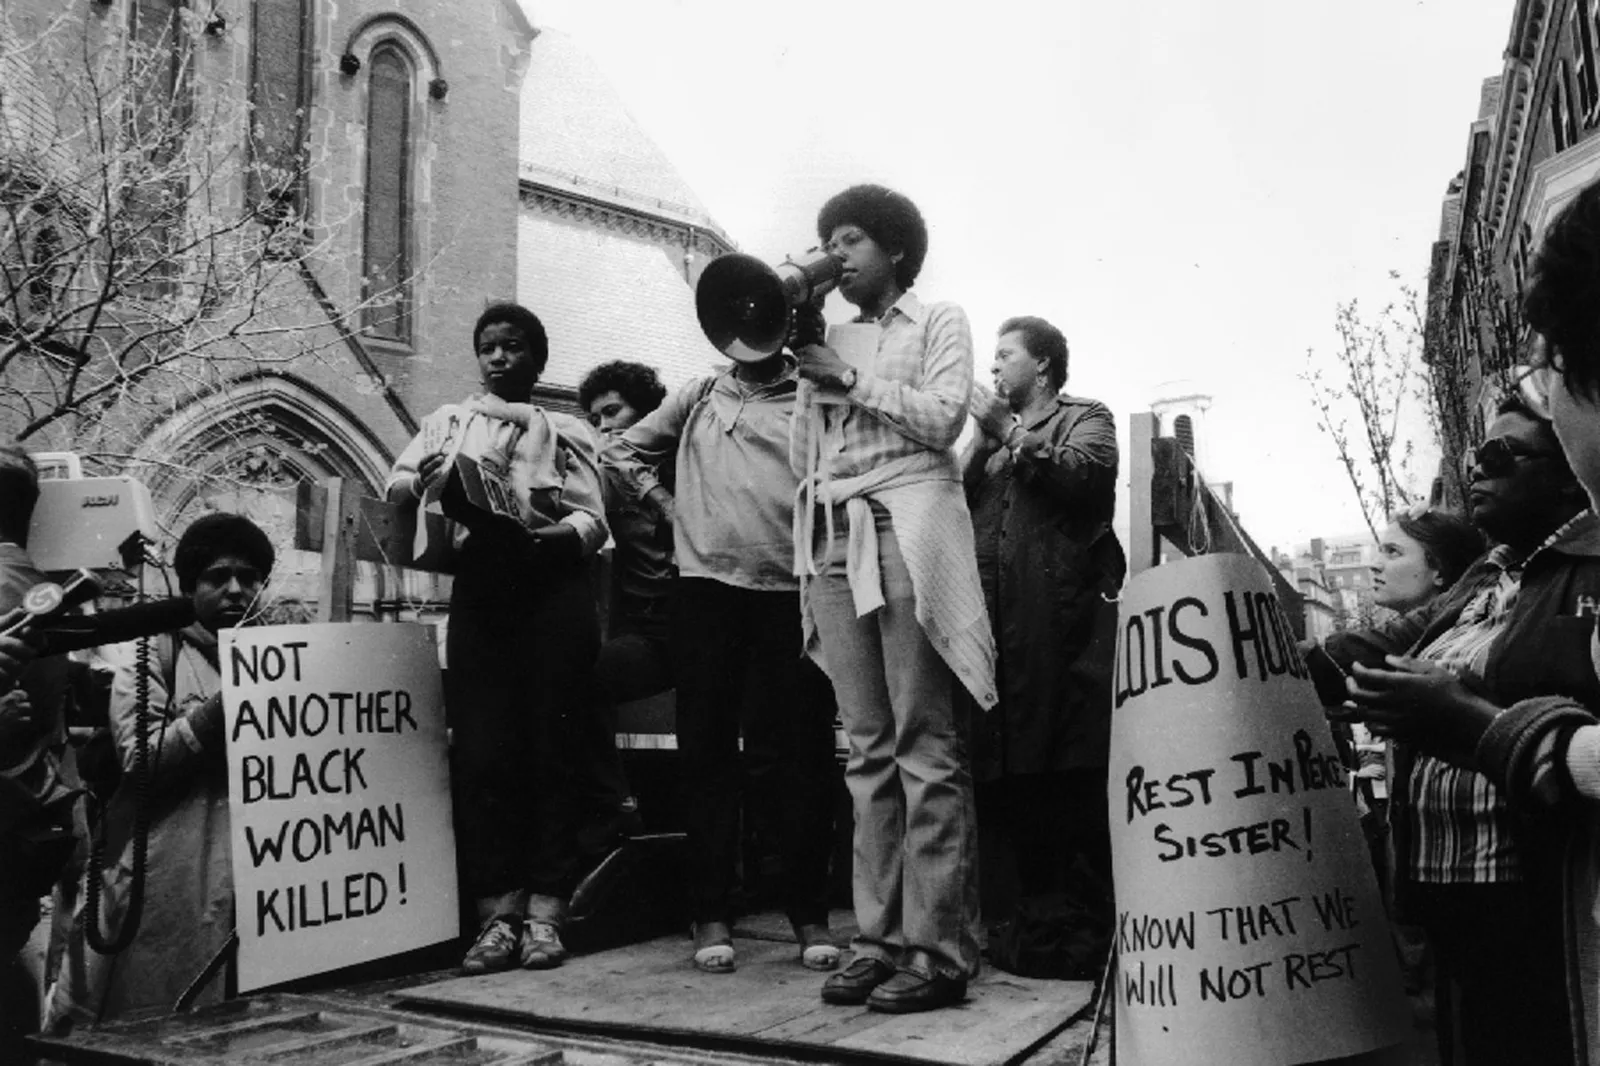 Black and white photo. Small group of Black women stand on a small platform. One holds a megaphone to her mouth. Another holds a sign by her feet that reads 'NOT ANOTHER BLACK WOMAN KILLED!